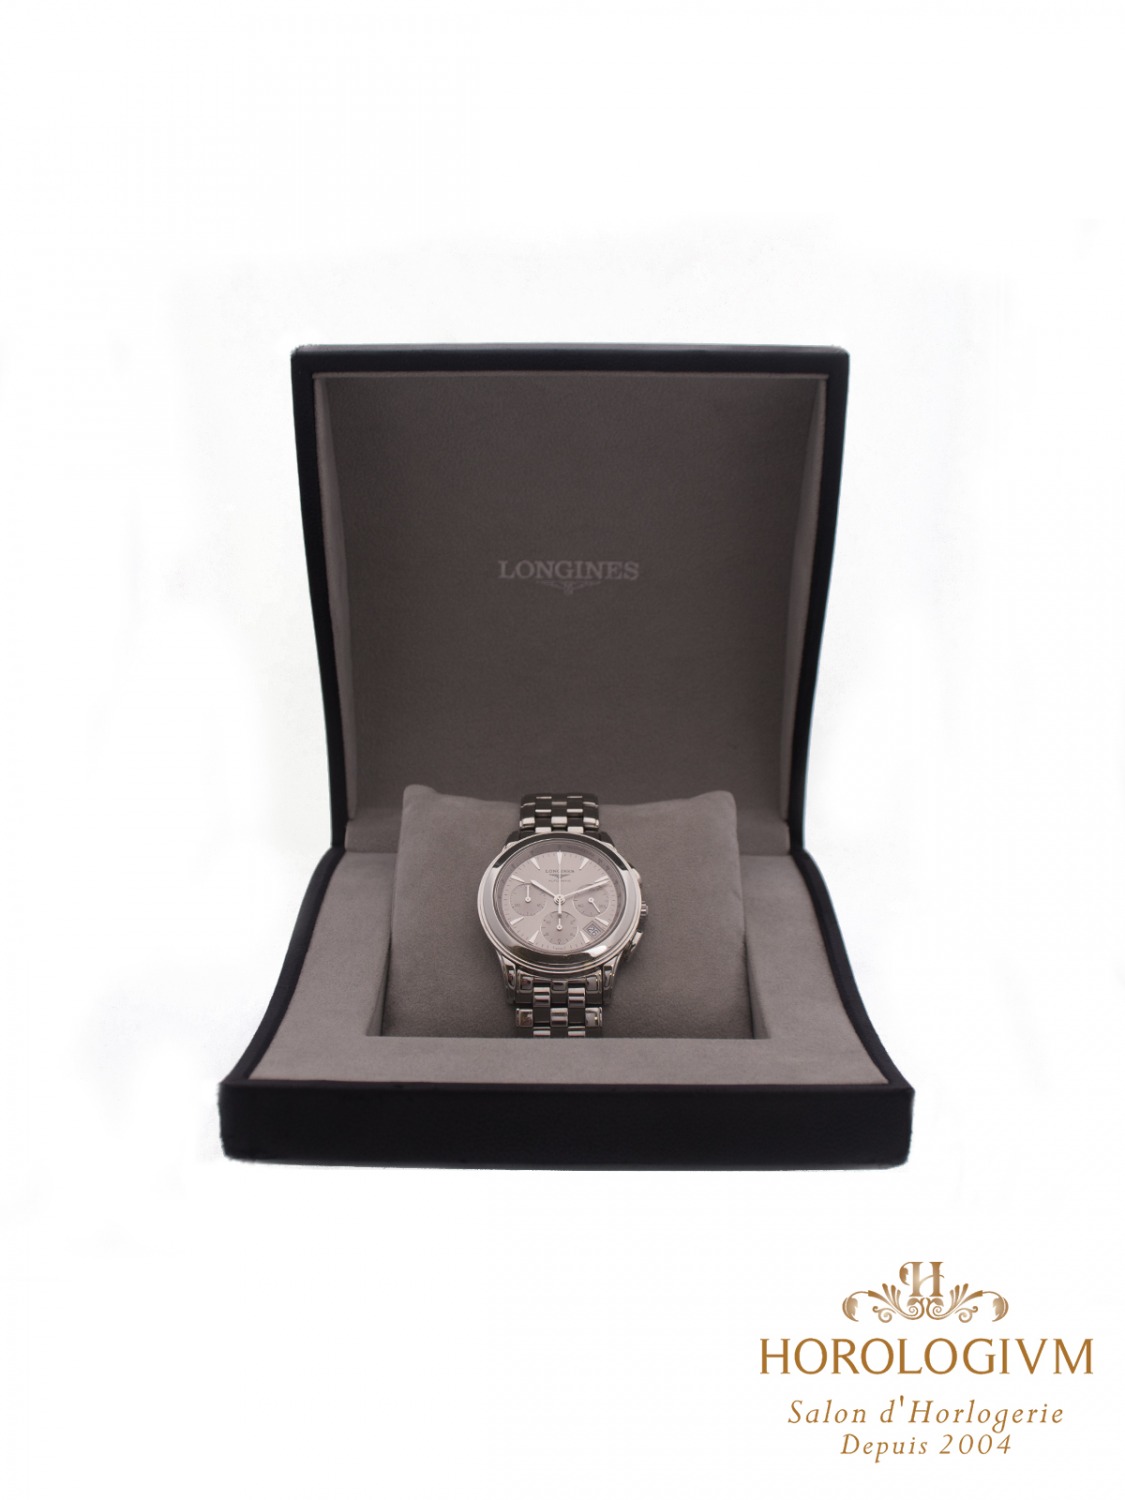 Longines Flagship Chronograph Ref. L4.718.4 watch, silver